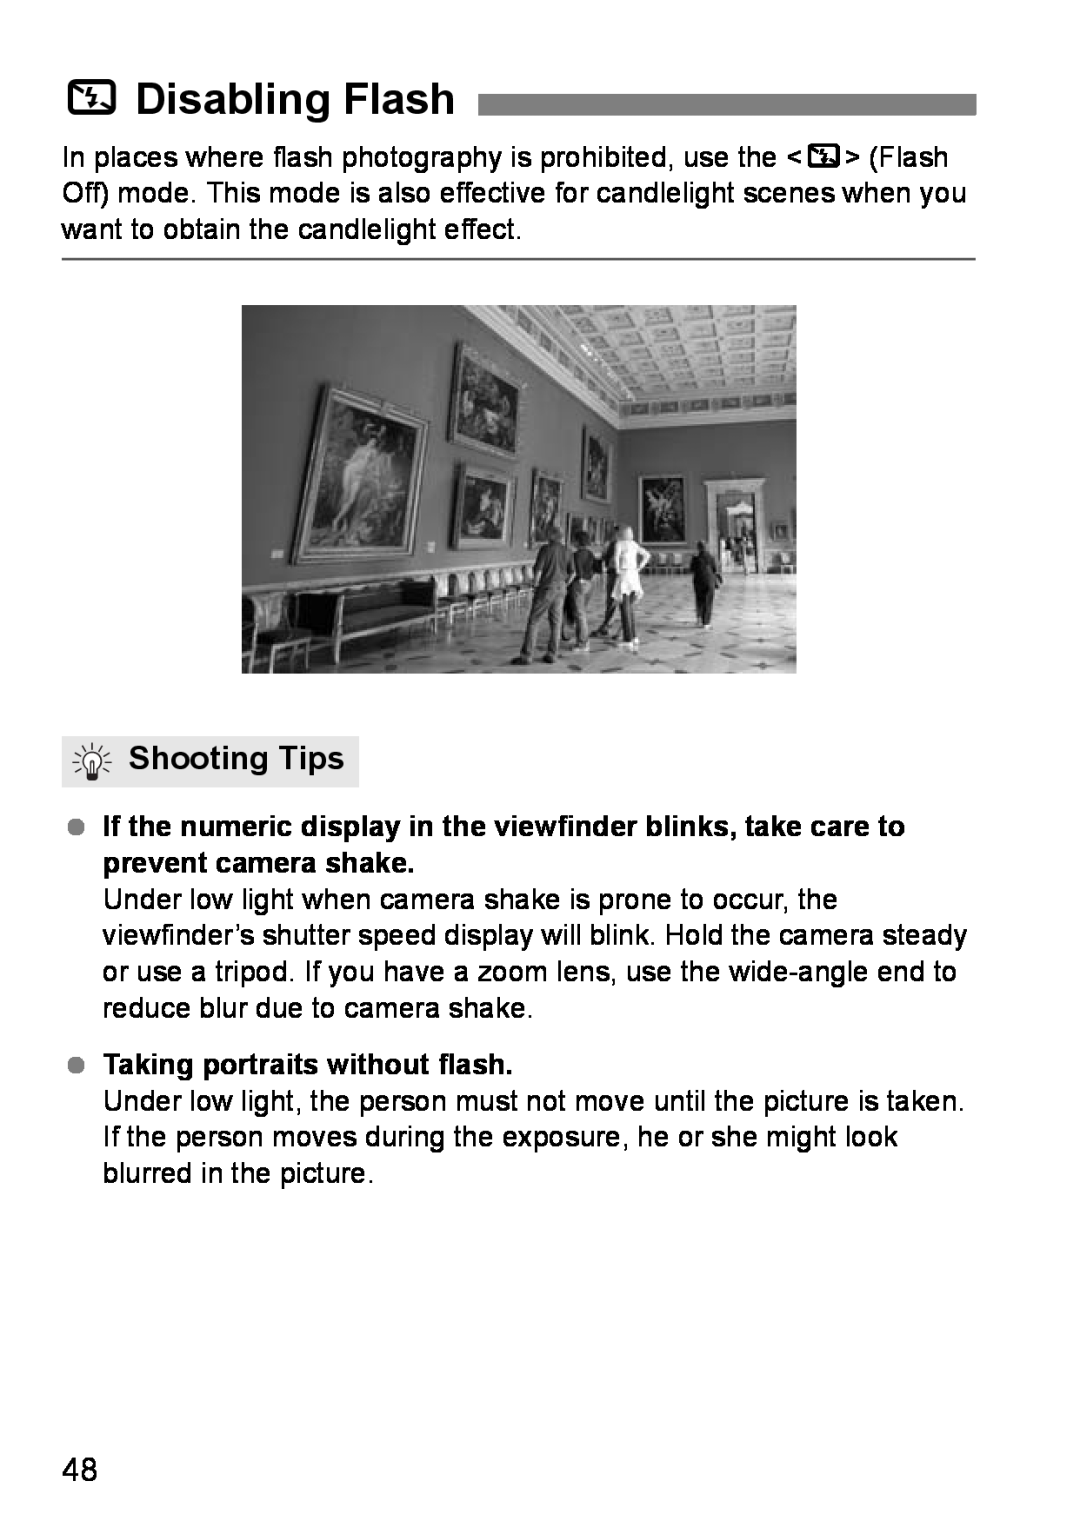 Canon EOS DIGITAL REBEL XTI instruction manual 7Disabling Flash, Shooting Tips, Taking portraits without flash 